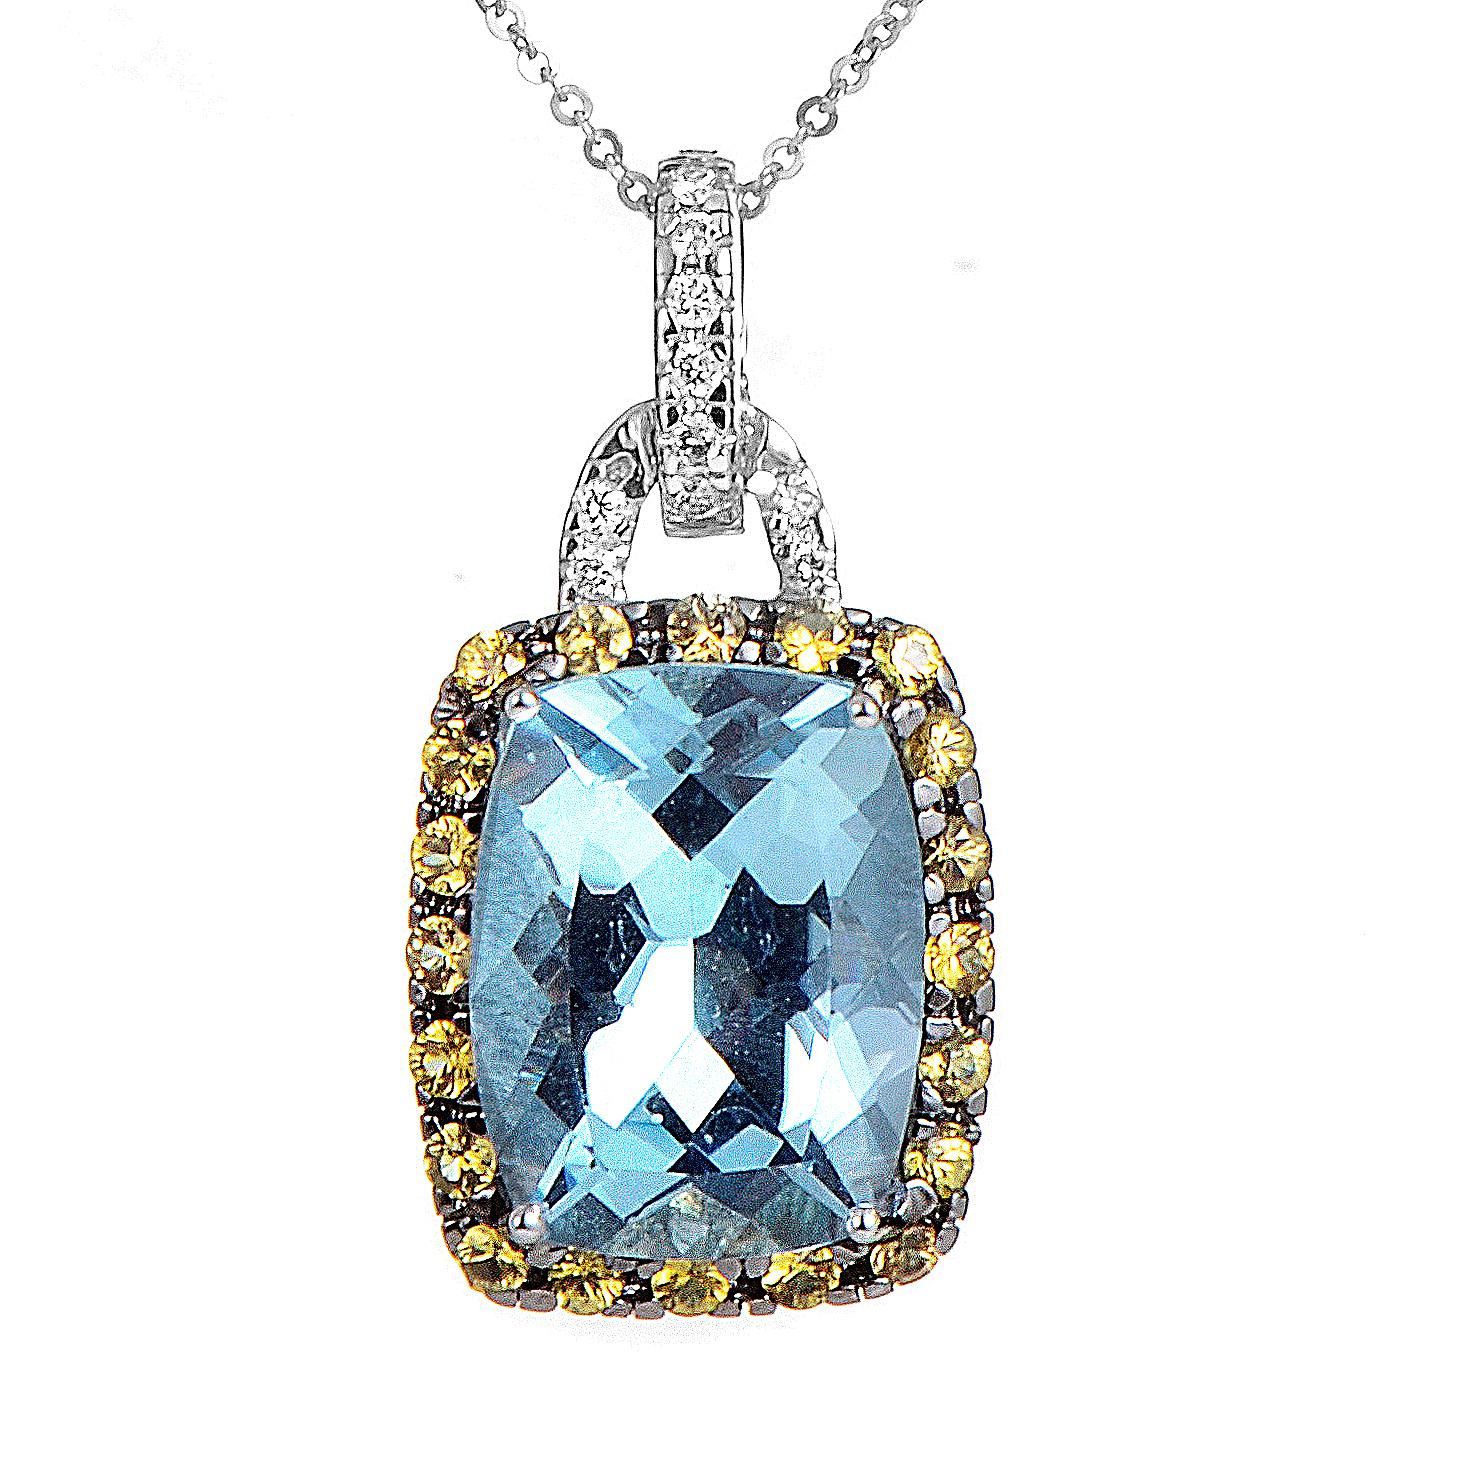 This 18K white gold necklace features a stylish design that will captivate everyone from the moment they lay their eyes on it. The necklace drops to 9 inches and is adorned with an ~13.60ct topaz pendant with catchy decorations. To cap all that,